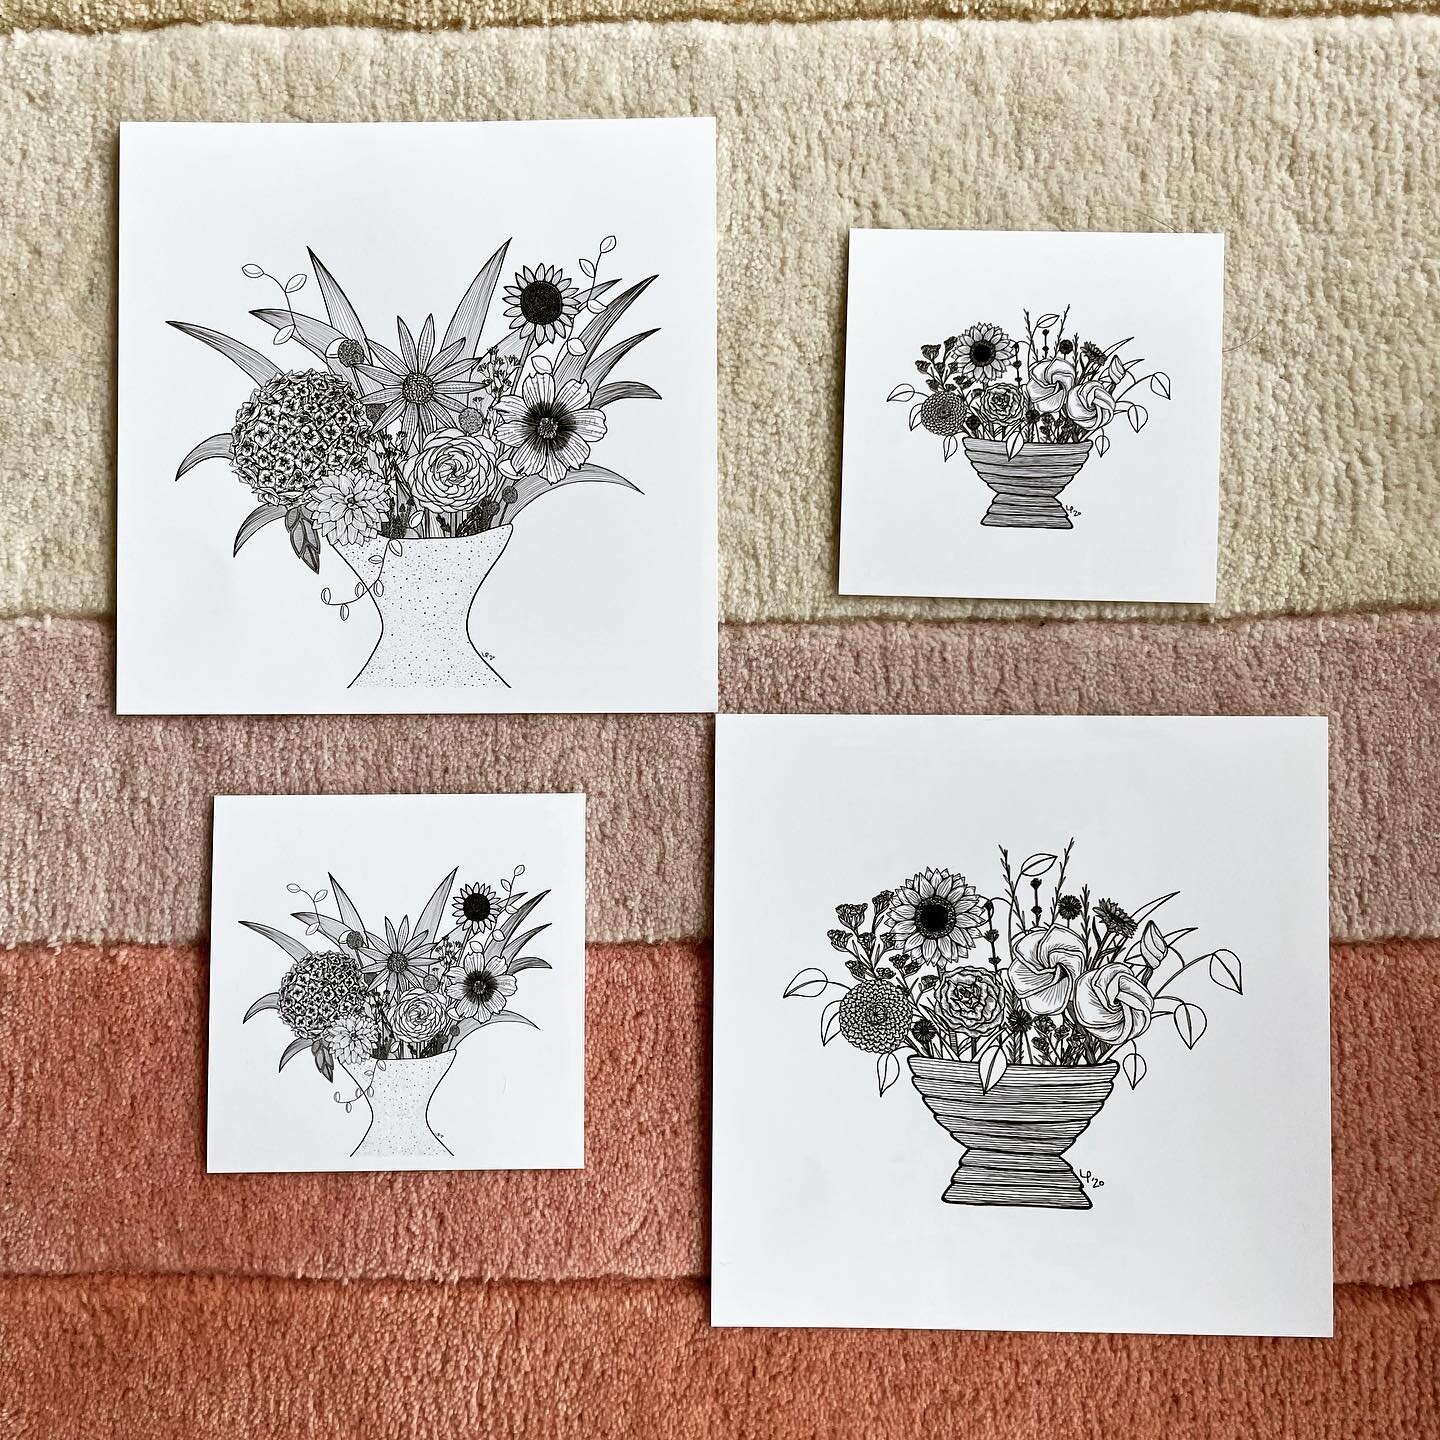 NEW STUFF, feat: OLD STUFF!

&bull; a couple of bouquets from the 2020 archives + mini gasworks! &bull;

Check out link in bio for deets, prices include ship, ship, shipping 🚢 + proceeds will go to @youthcaresea 💕

#makegoodforgood #artforgood #goo